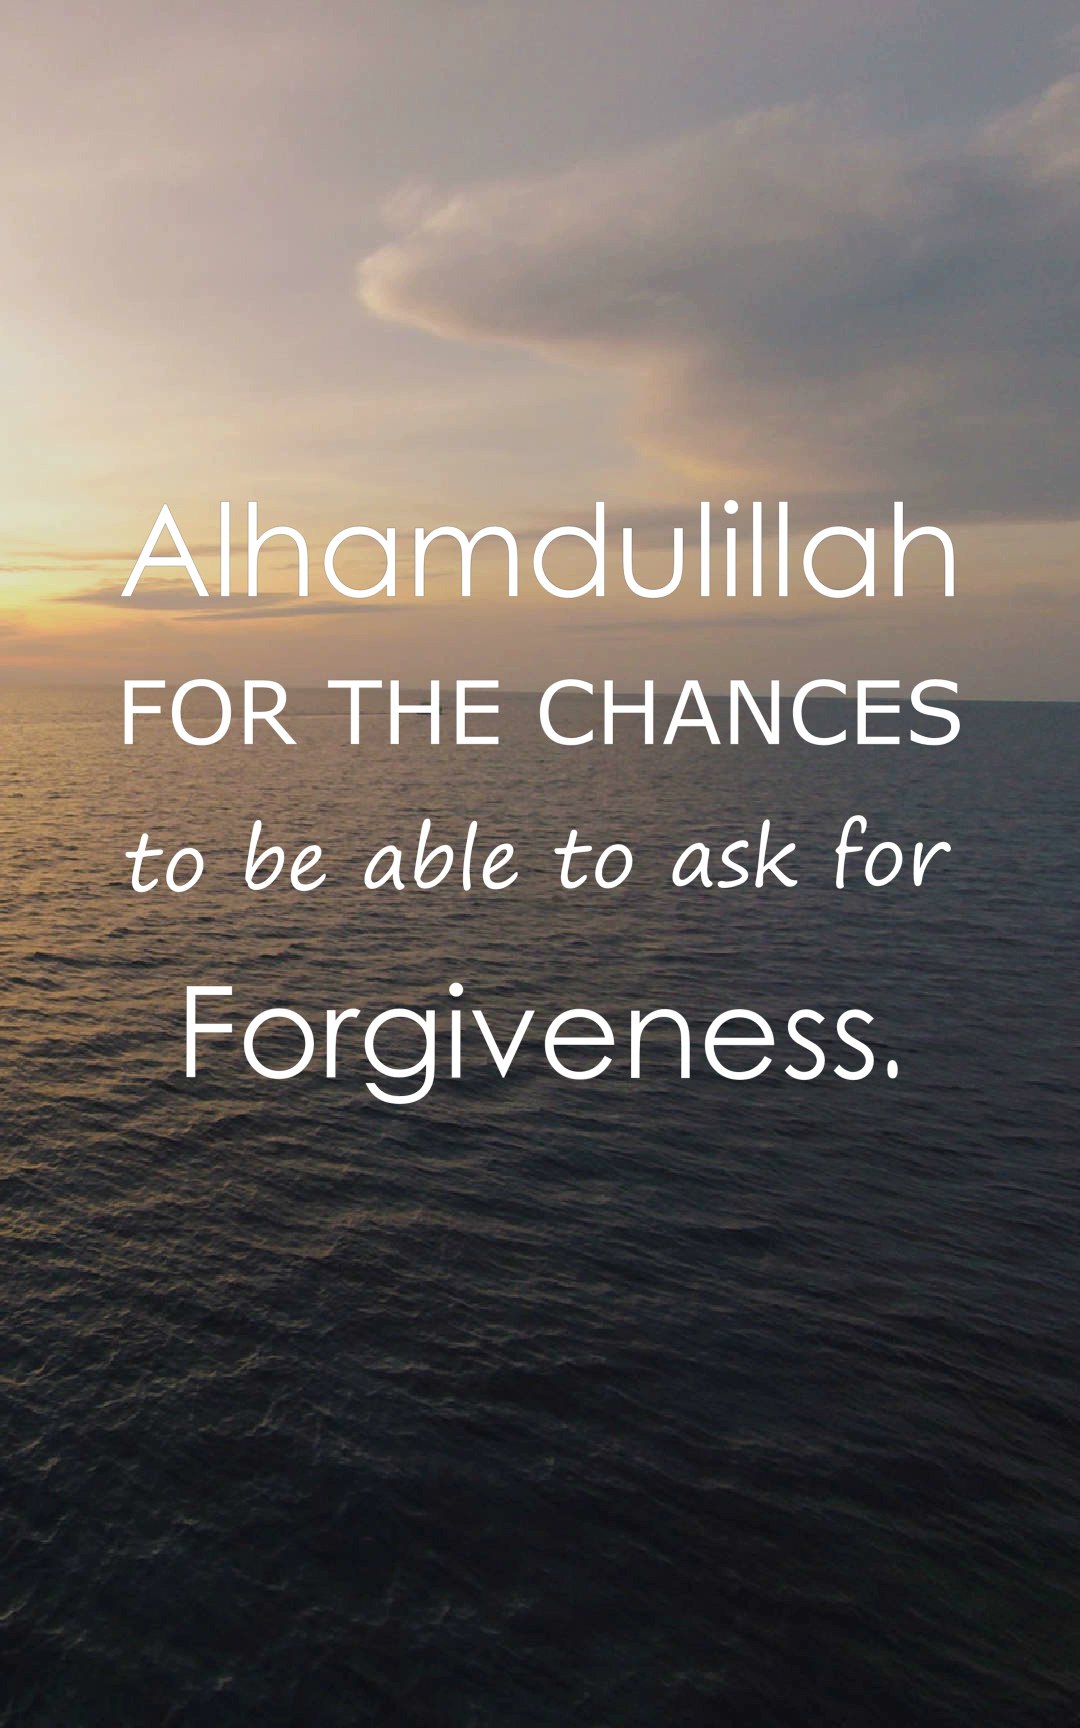 Inspirational Islamic Quotes With Images